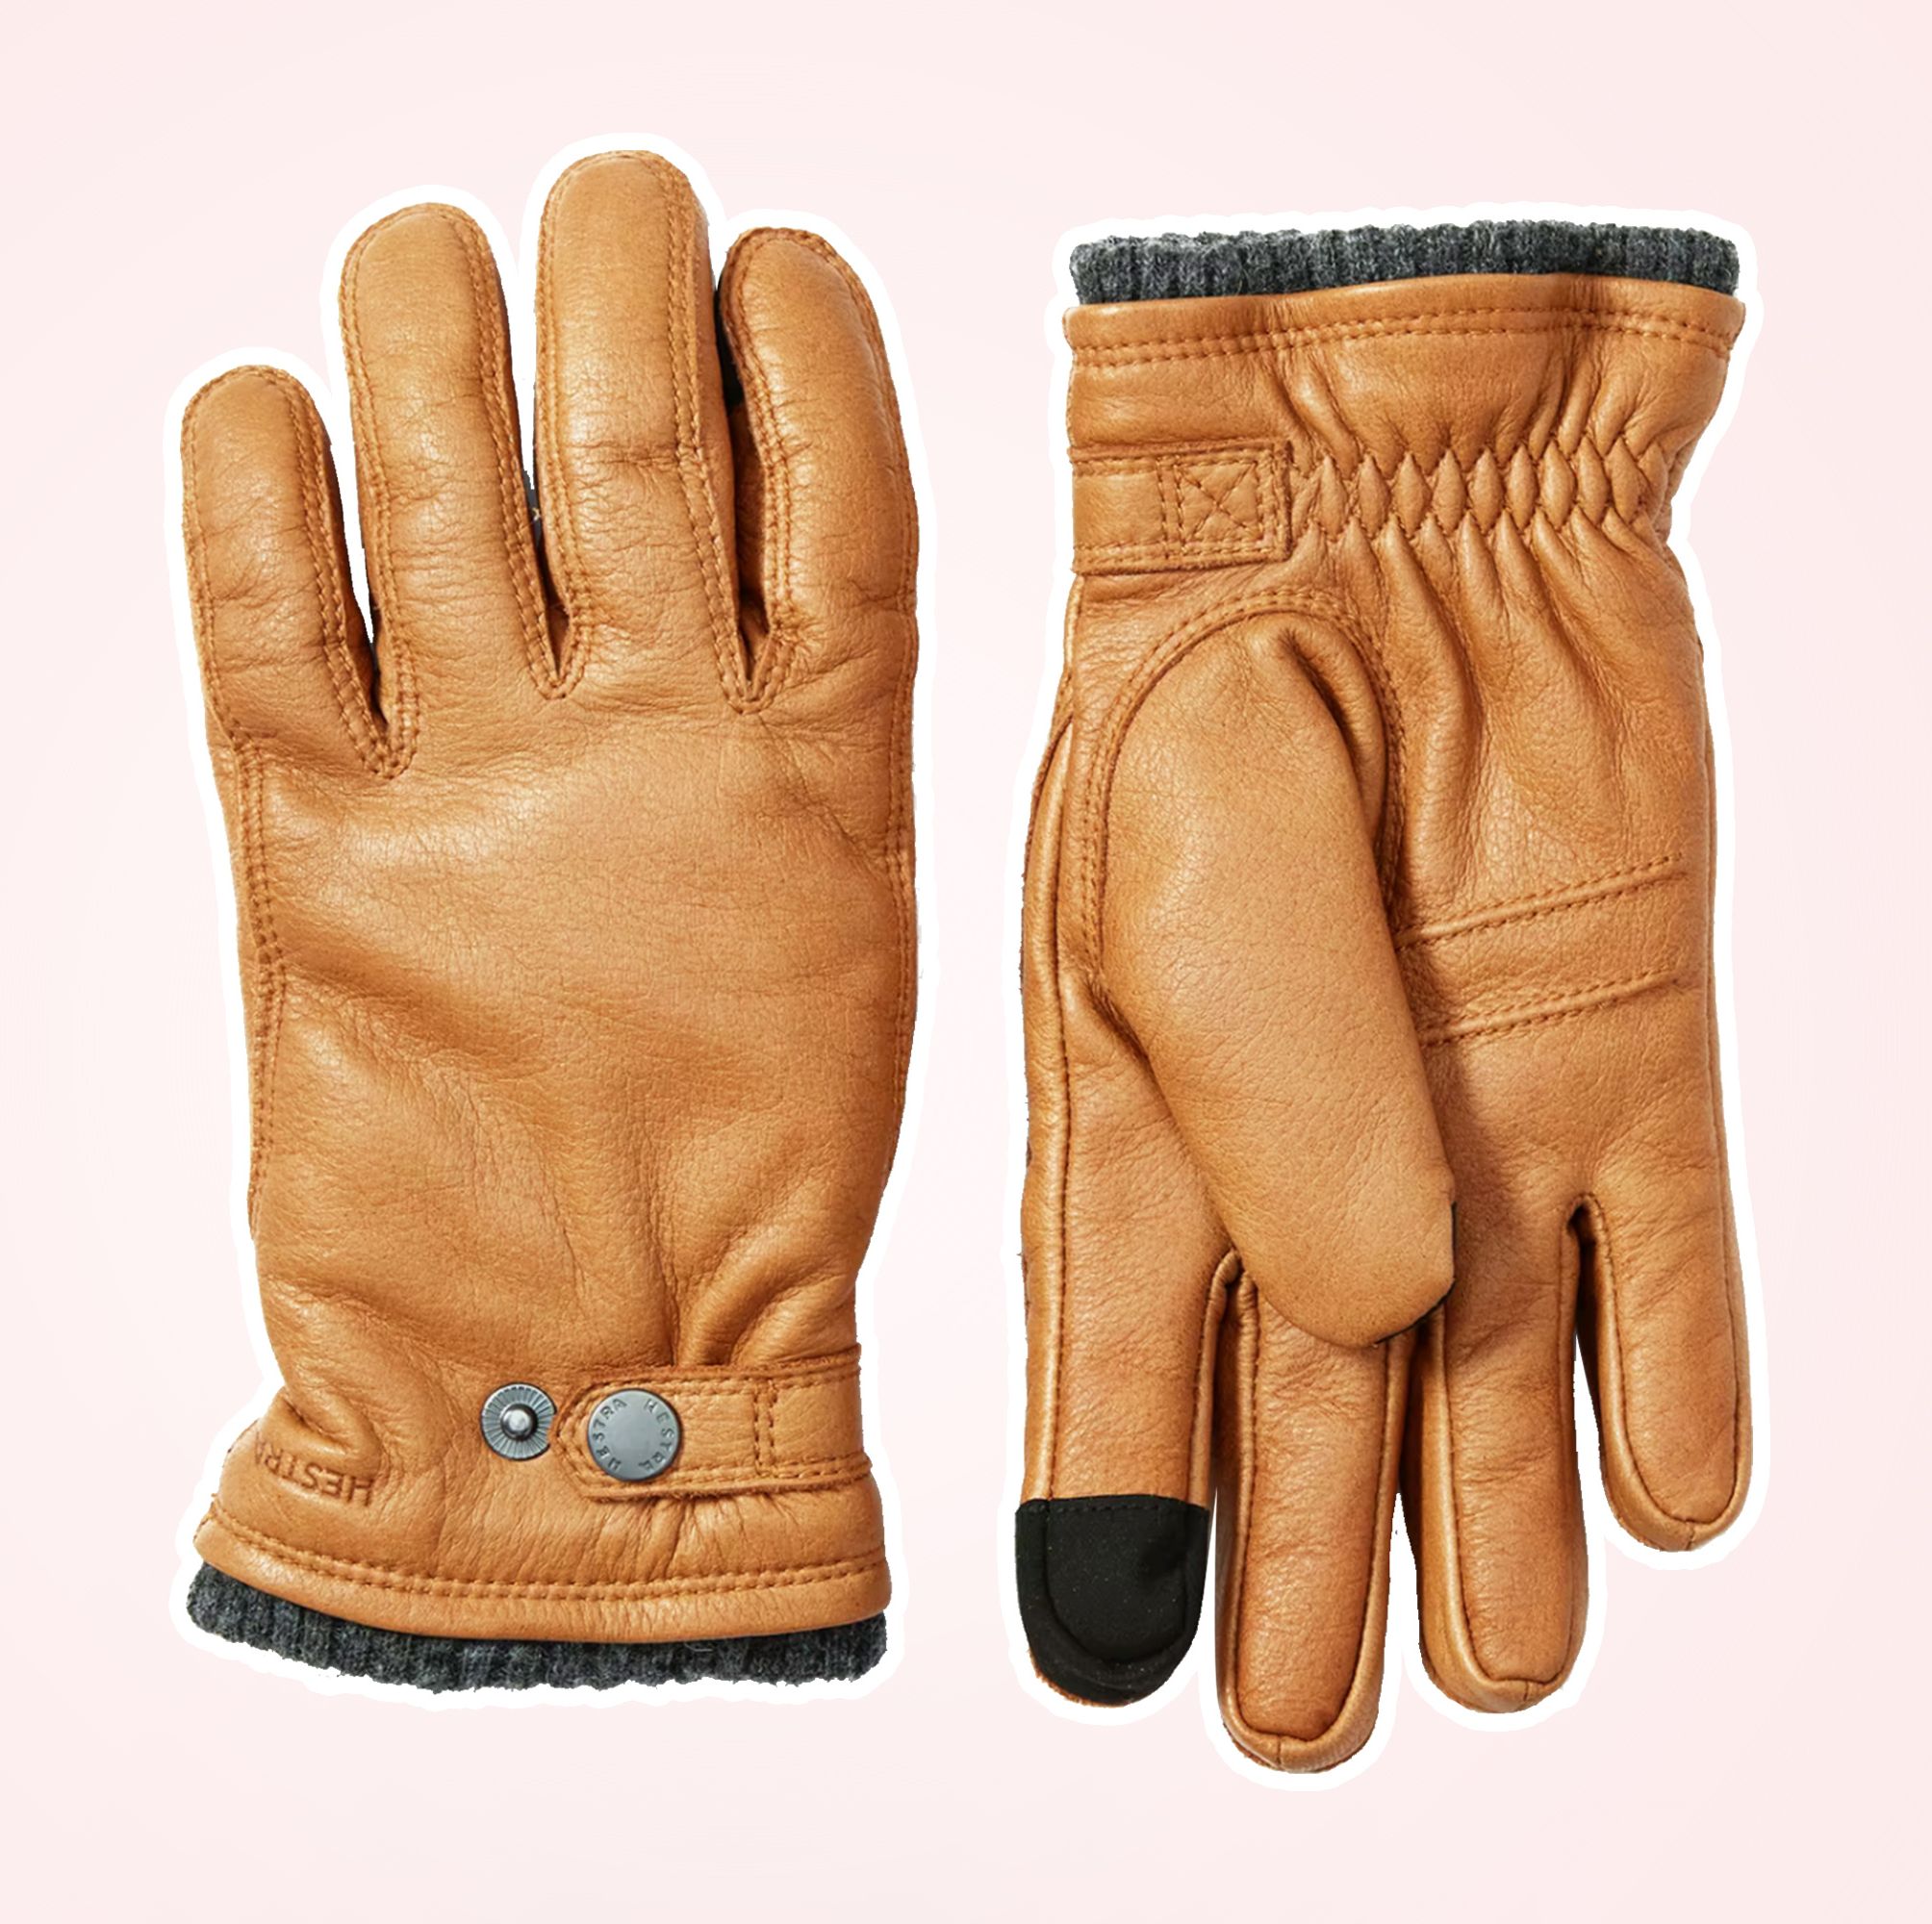 The 25 Best Winter Gloves to Keep Your Hands Warm All Season Long